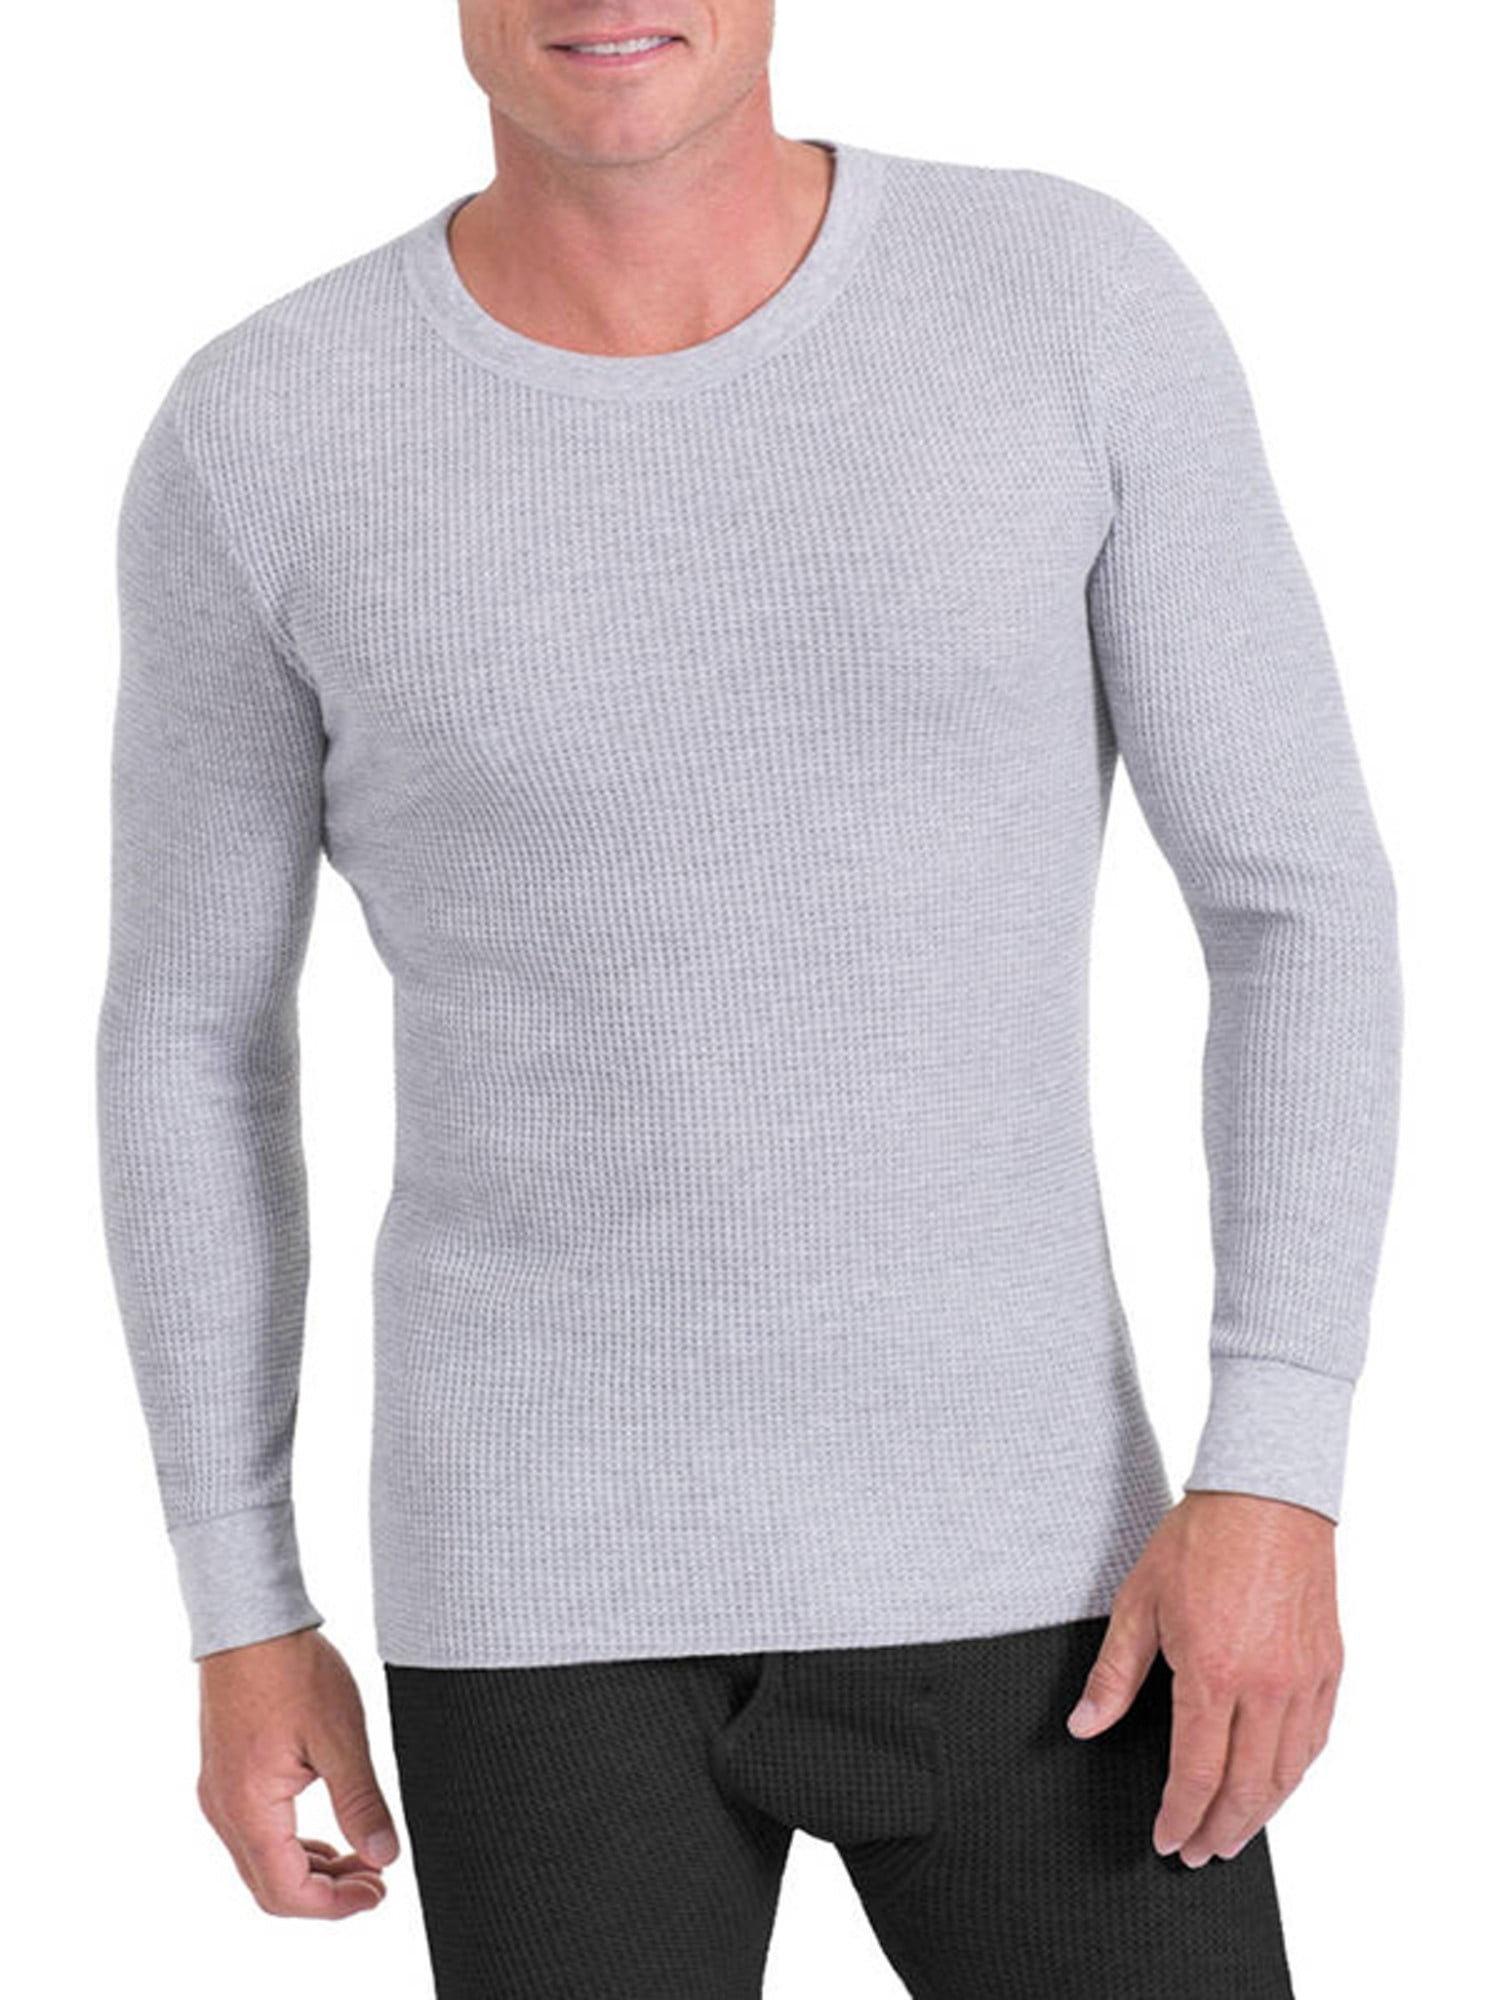 NEW Mens Fruit of the Loom Thermal CREW Top-Gray Large Size! 